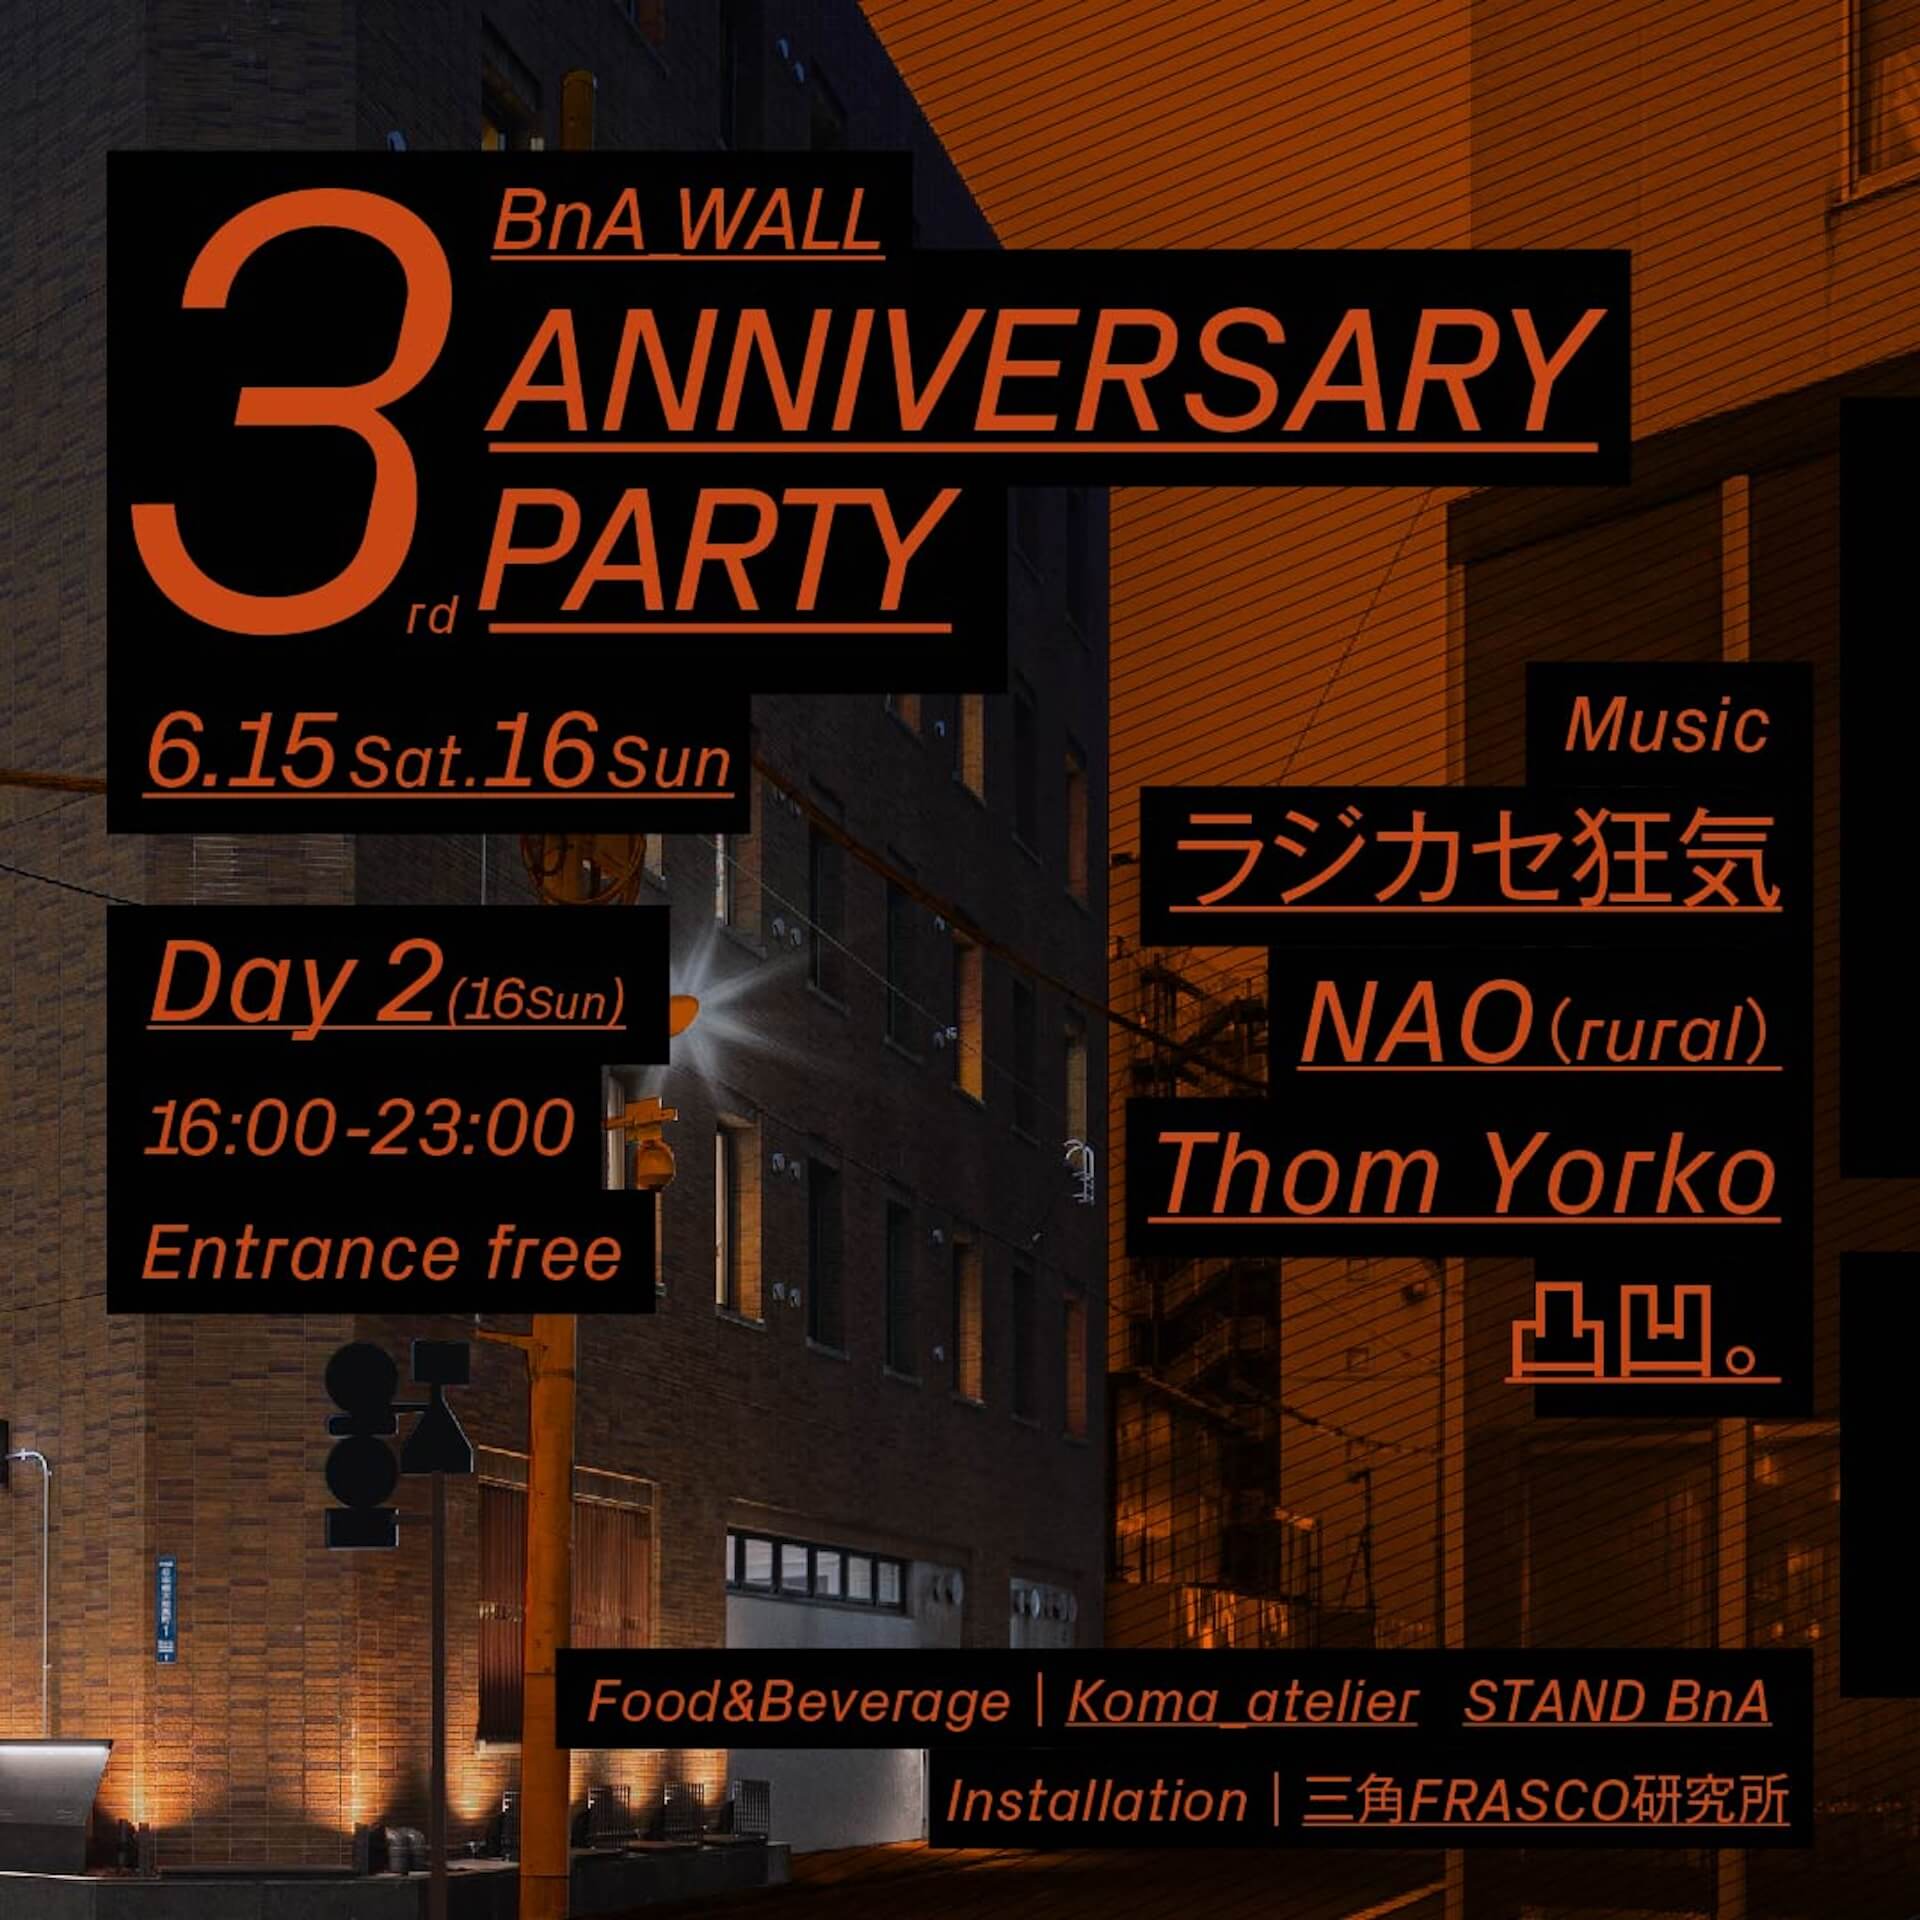 BnA_WALL 3rd Anniversary Party